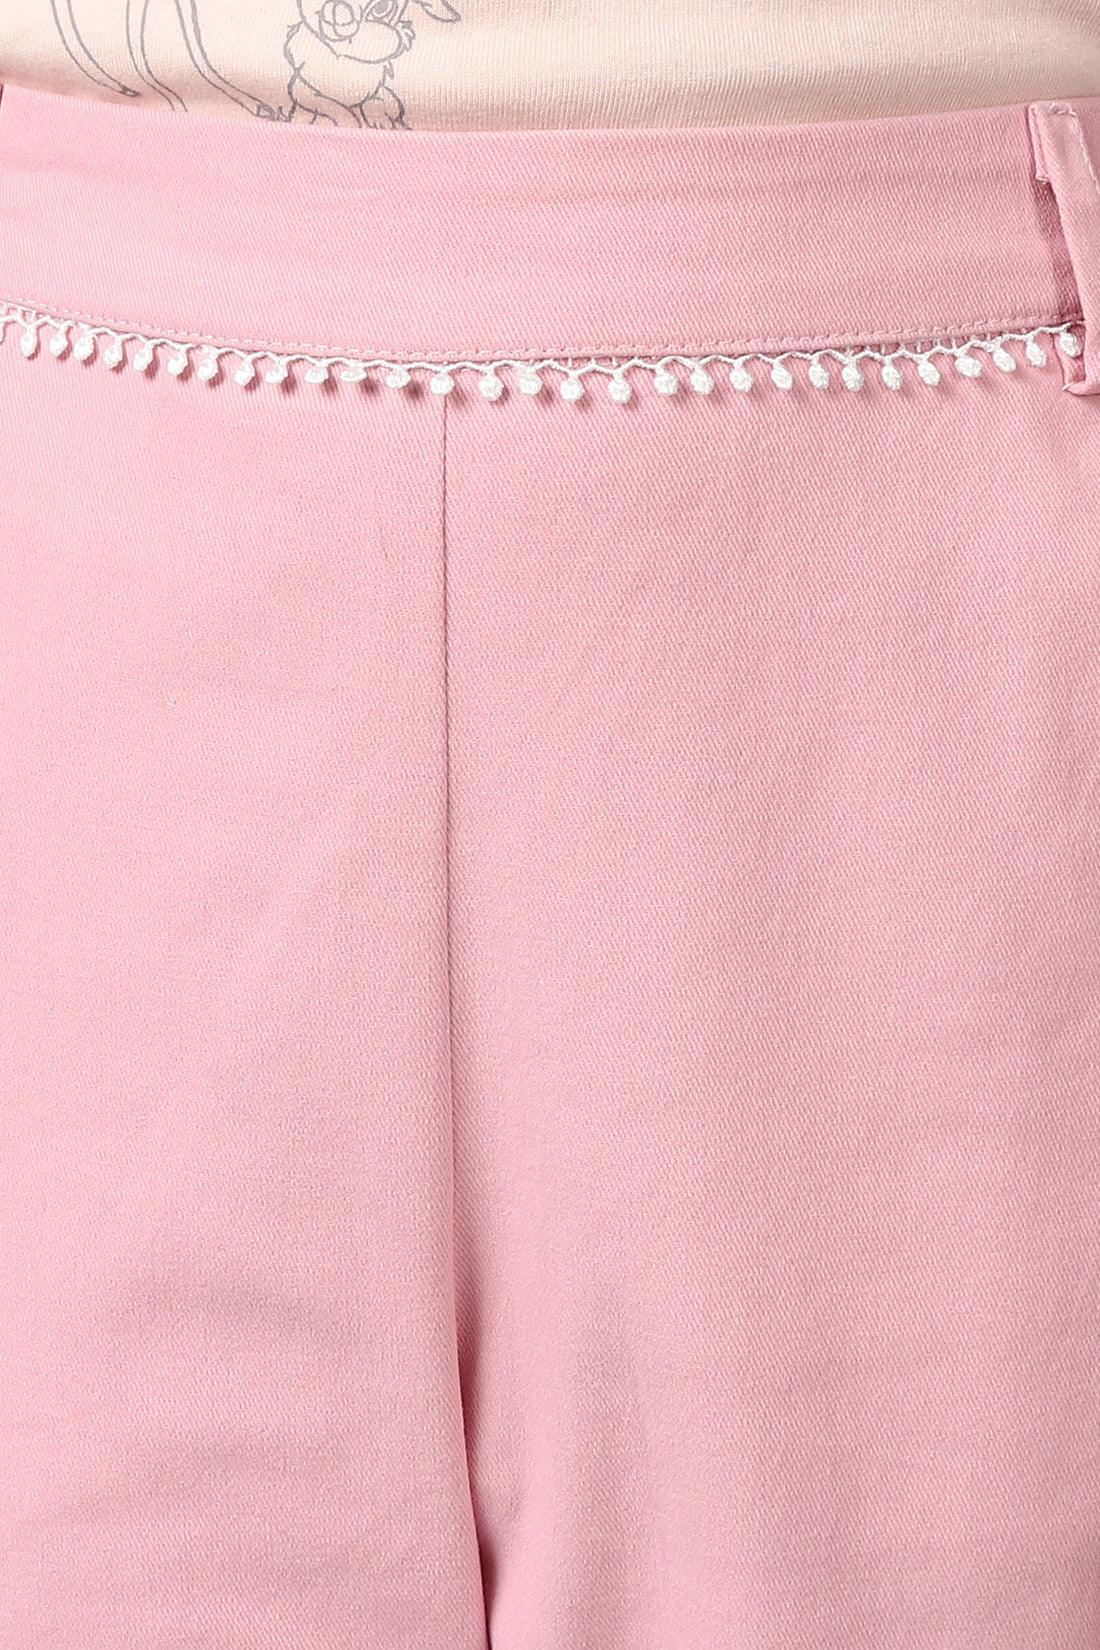 One Friday Kids Girls Pink Cotton Laced Trouser